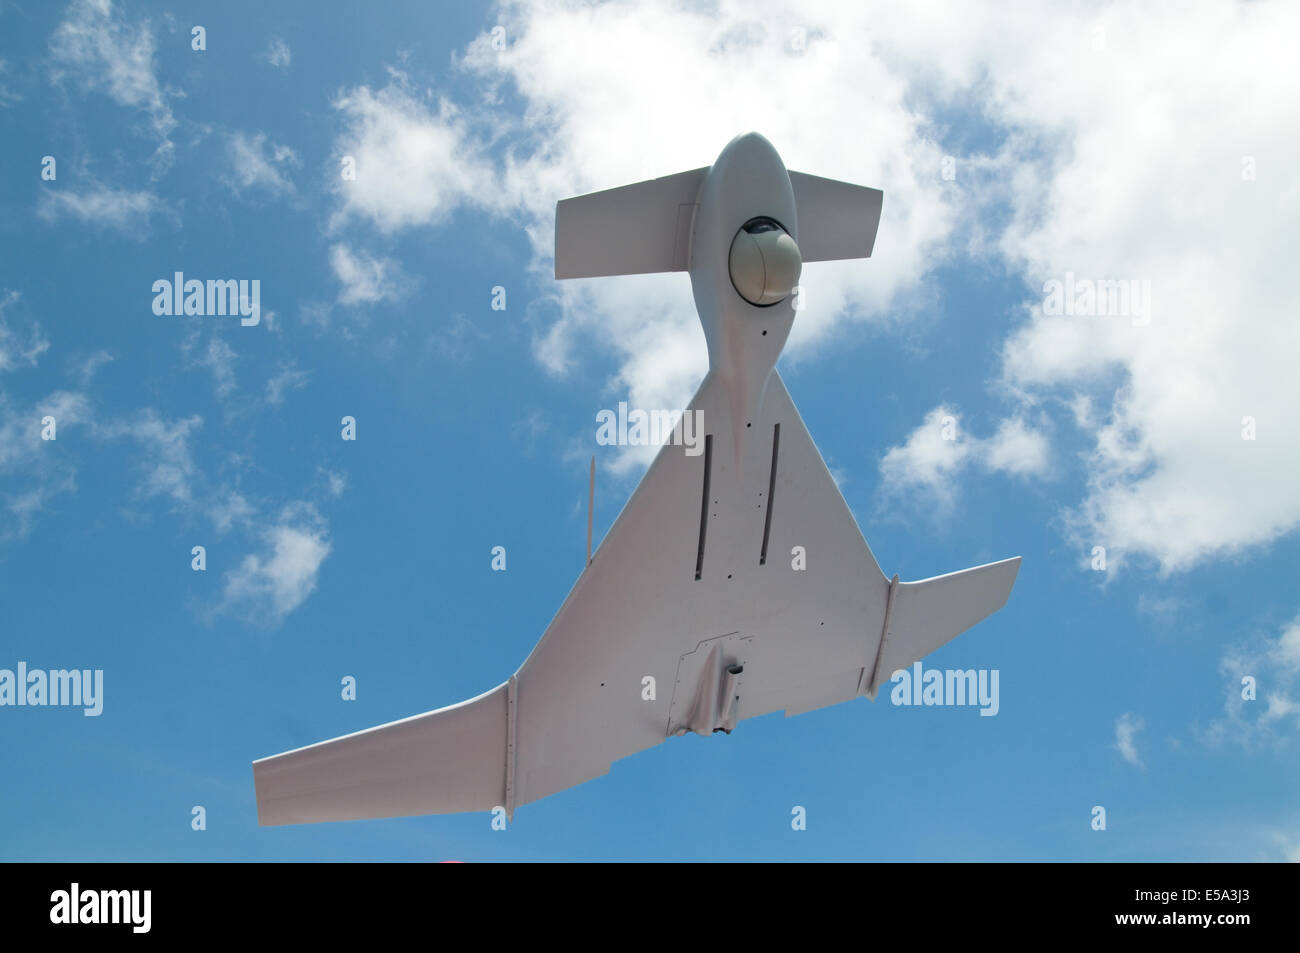 Unmanned Aerial Vehicle, UAV or drone, with camera in the nose for surveillance missions. Stock Photo